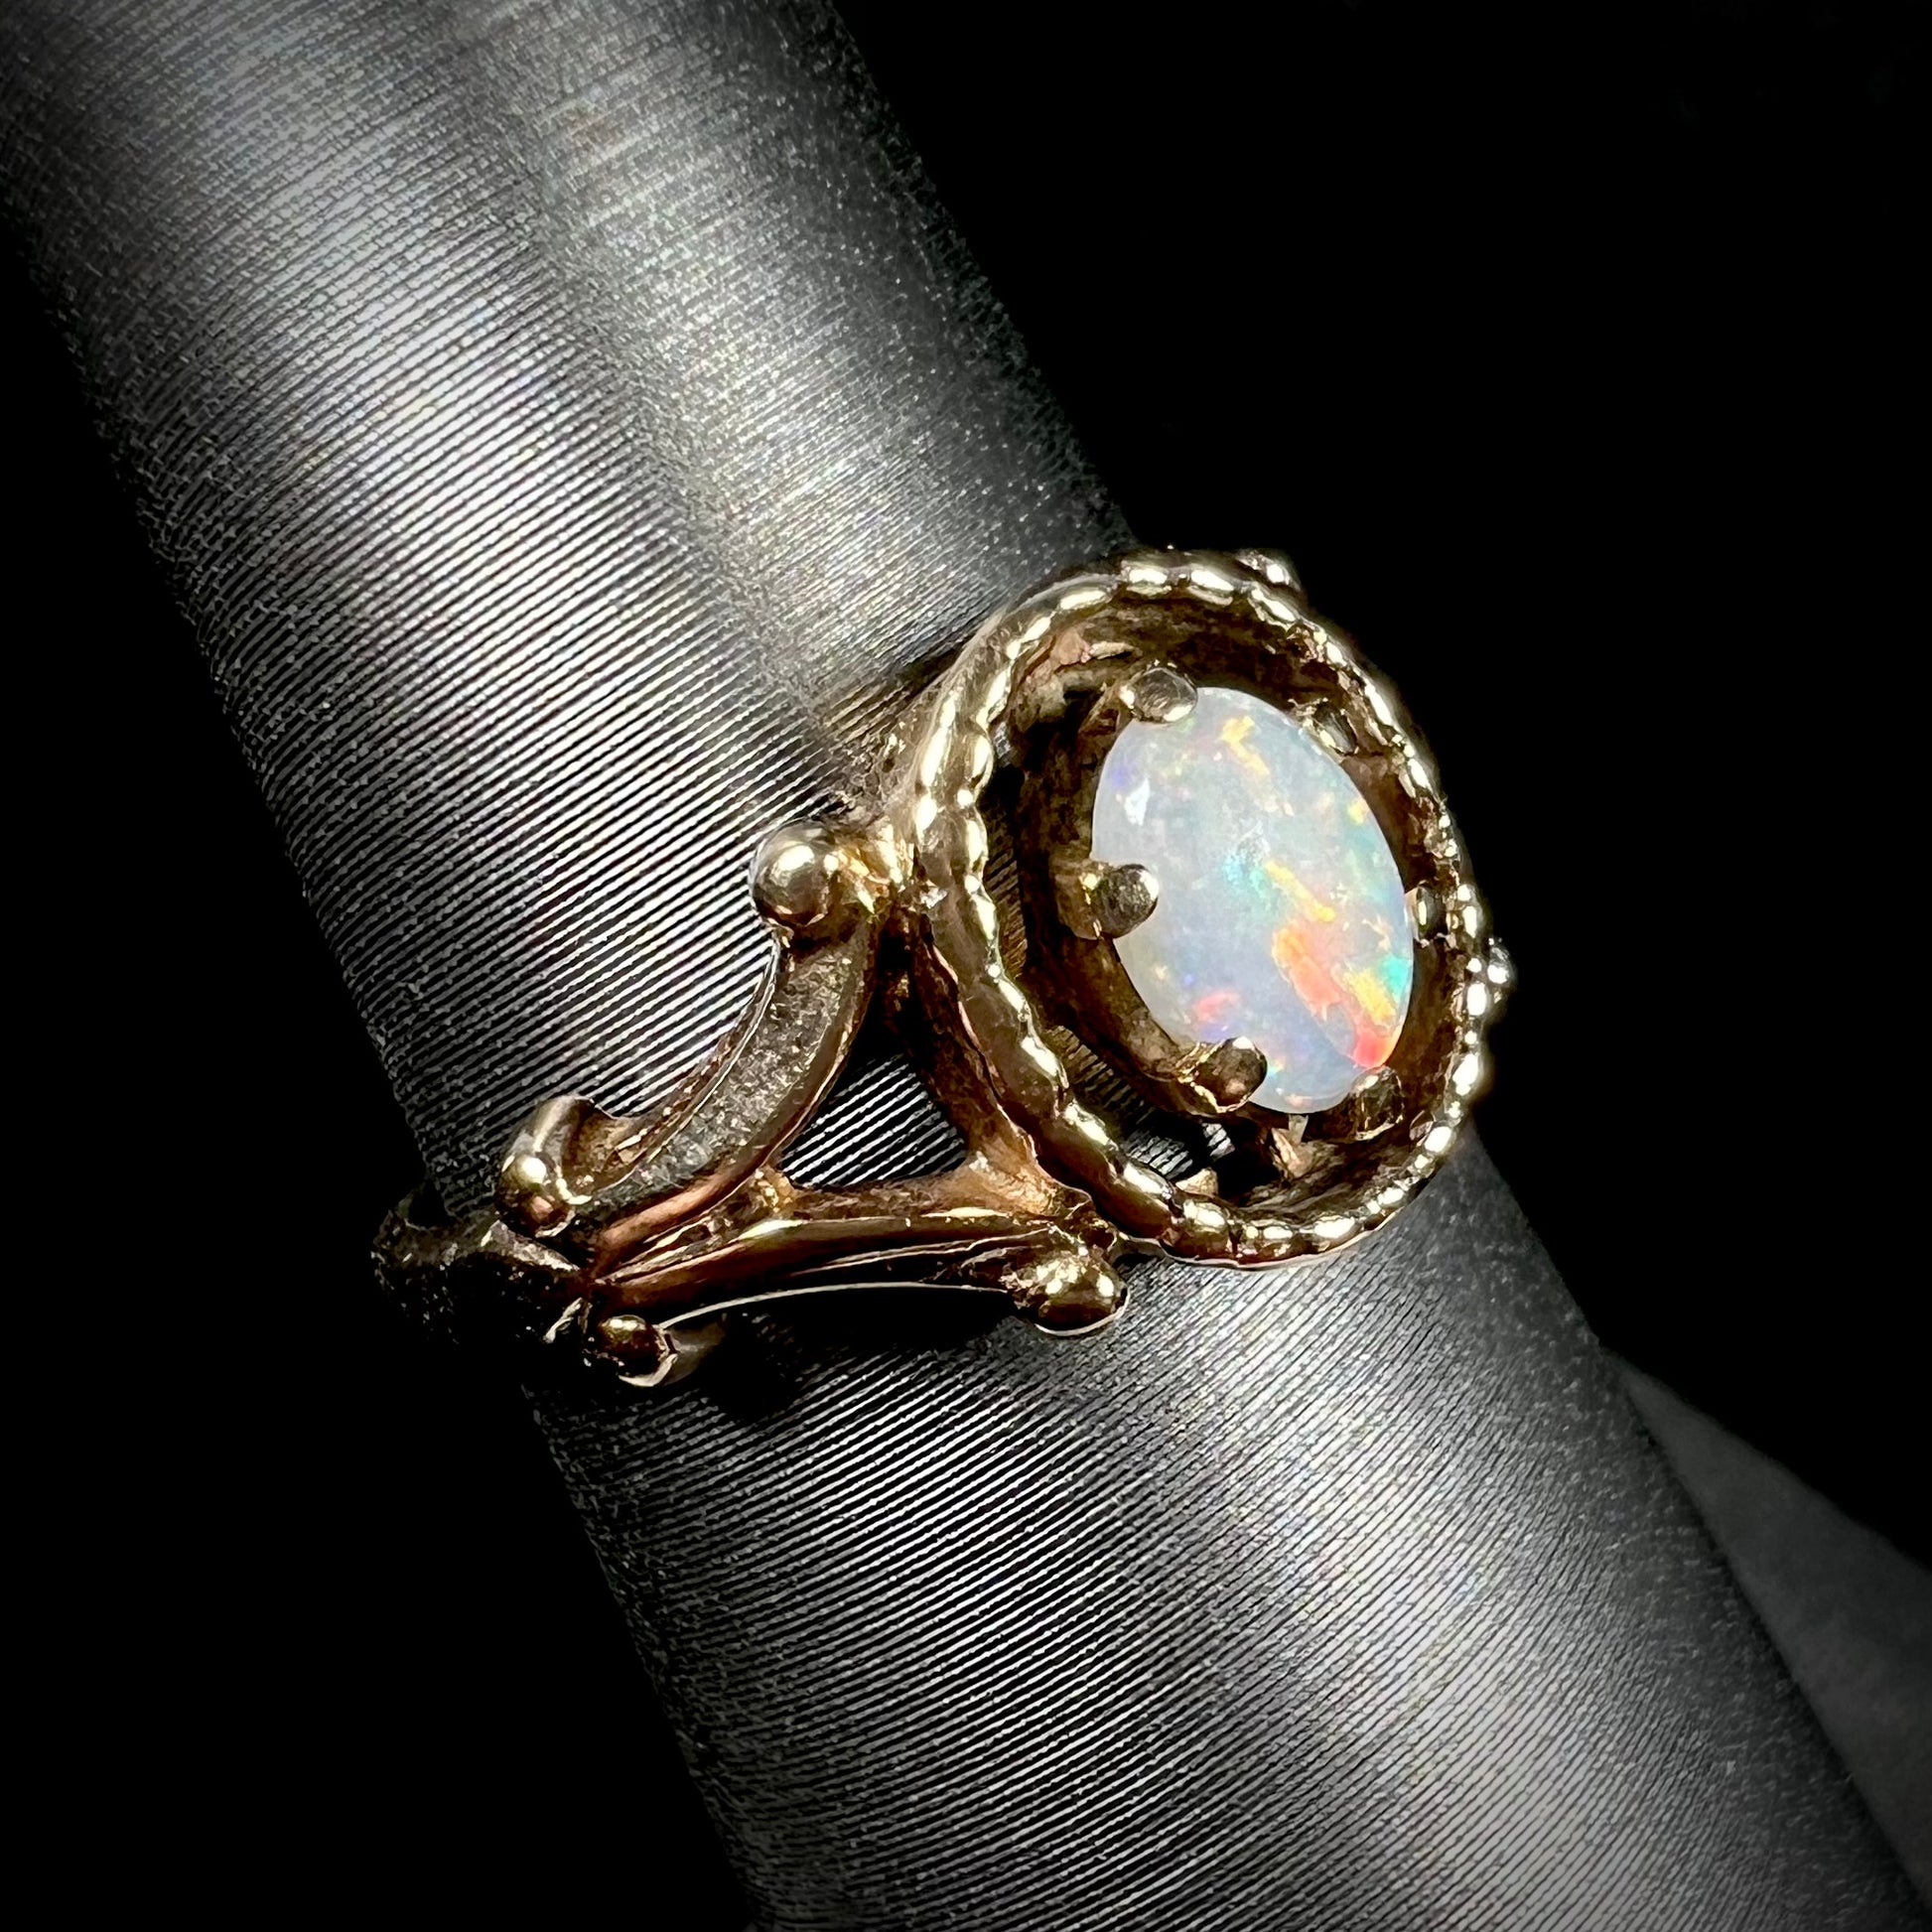 A ladies' Art Nouveau style opal solitaire ring.  The mounting is yellow gold with filigree accents.